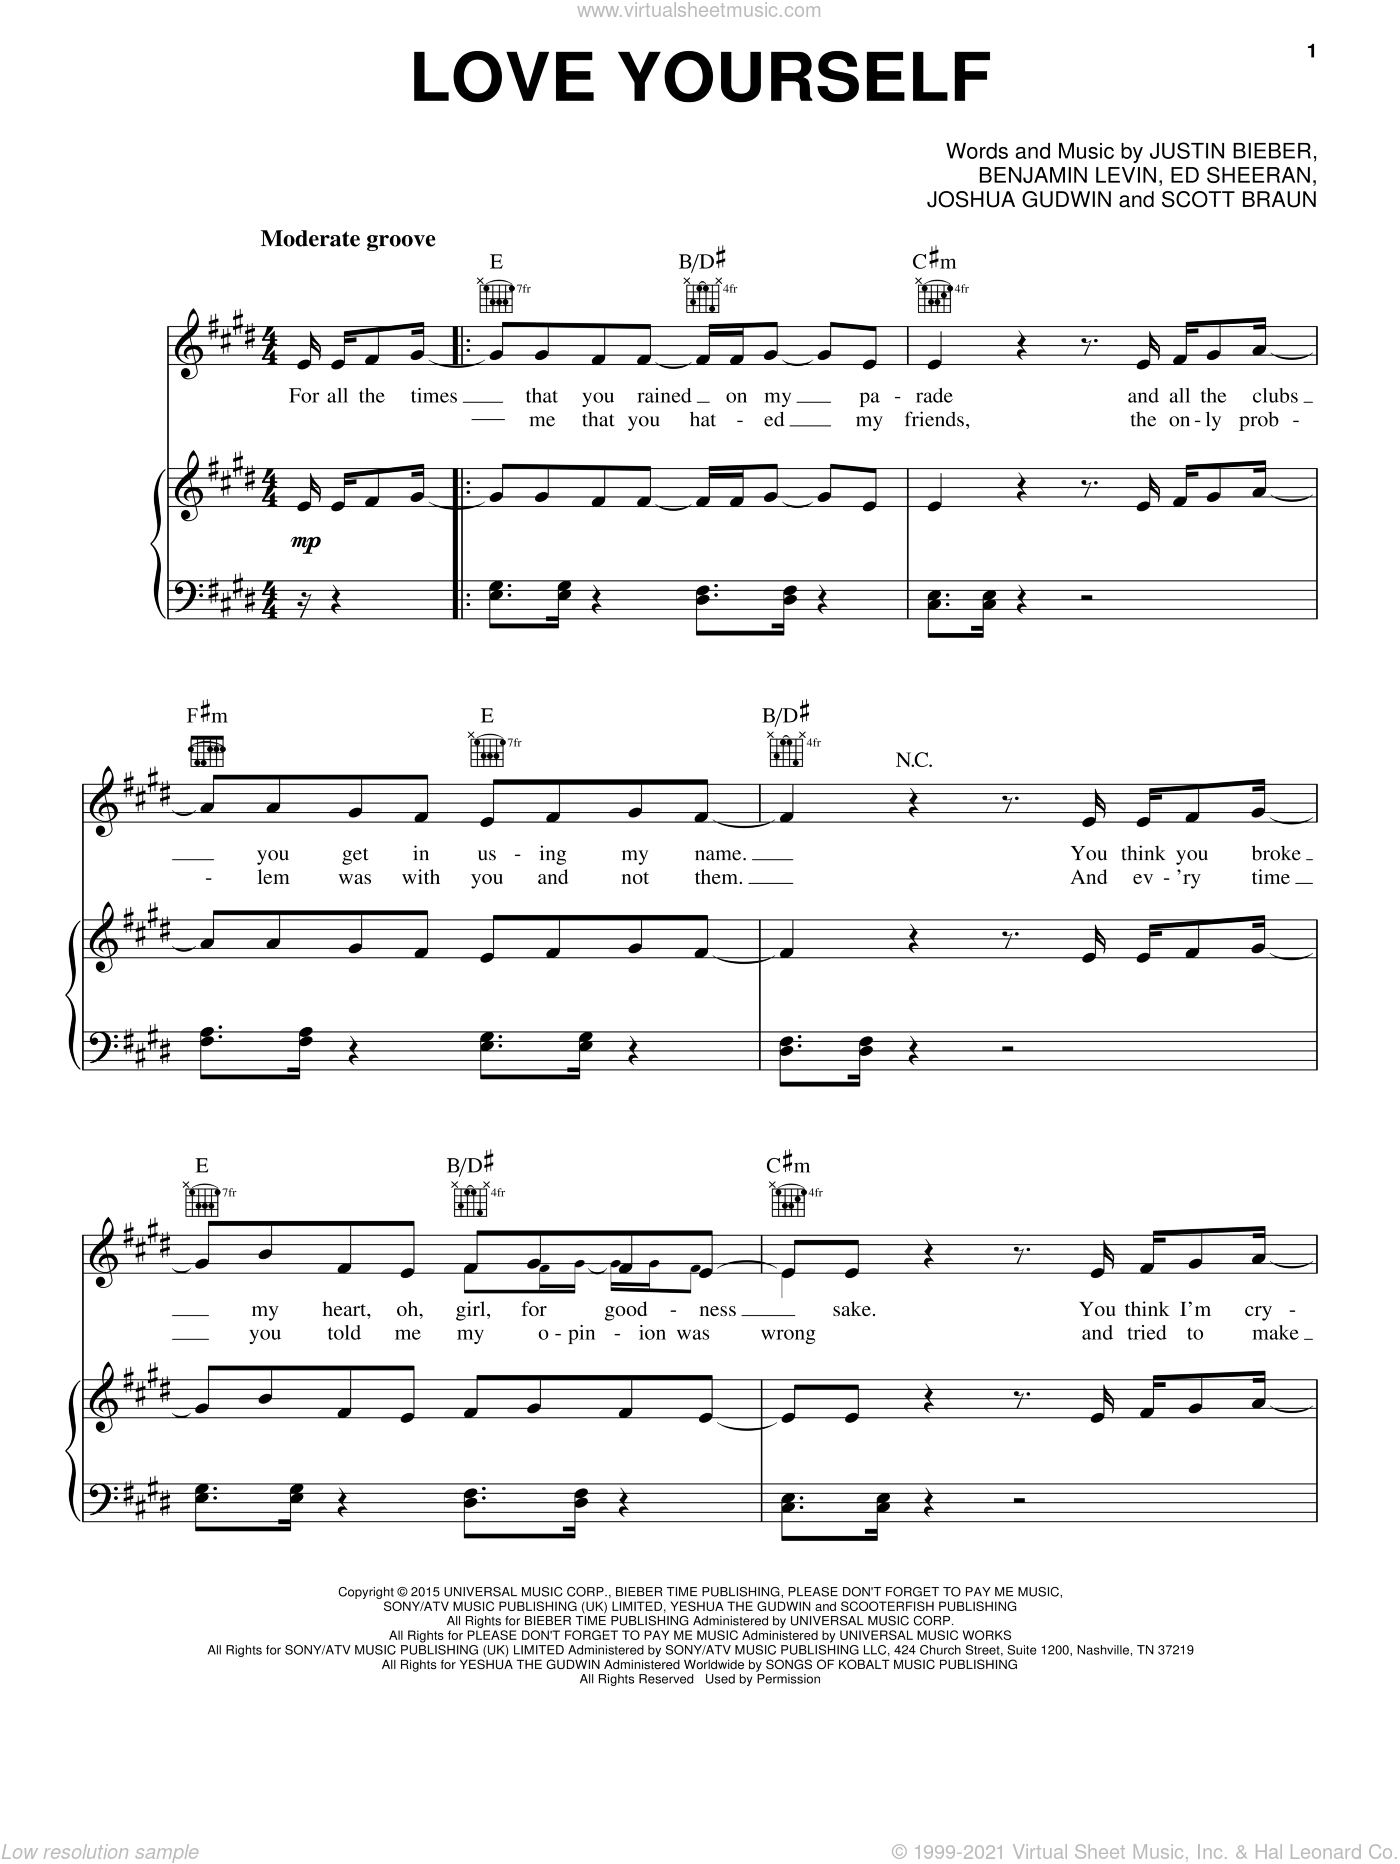 Bieber - Love Yourself sheet music for voice, piano or guitar1400 x 1864